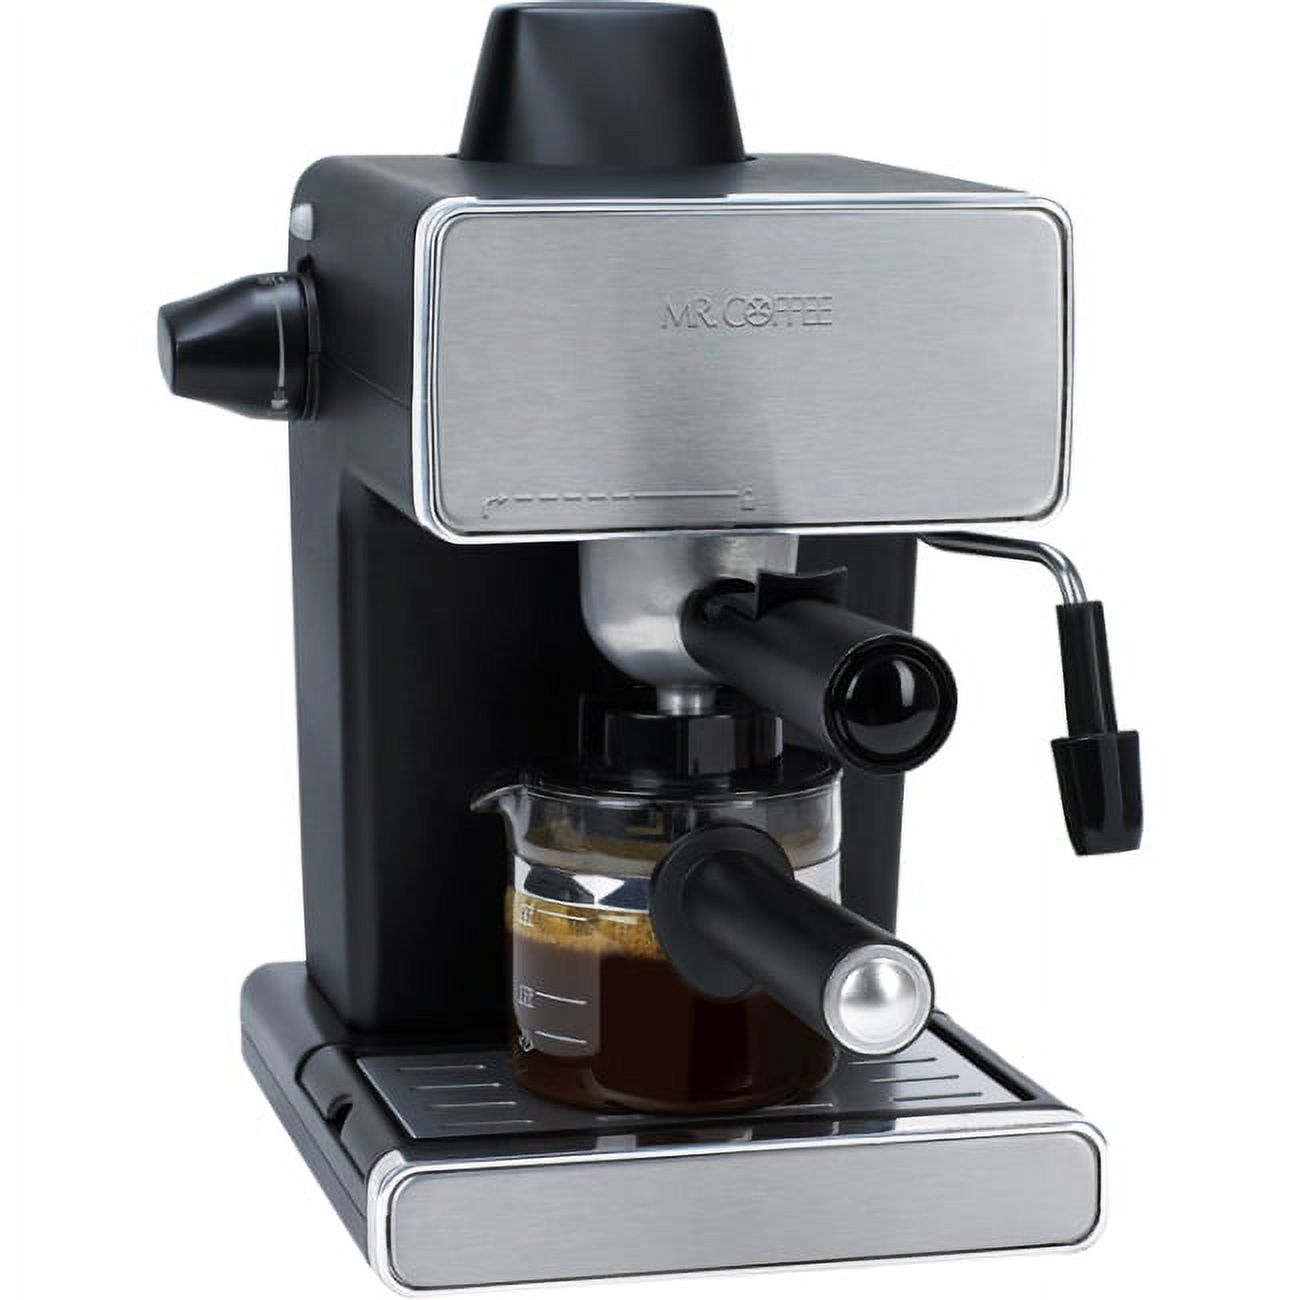 Mr. Coffee Espresso Maker, Stainless Steel and Black, BVMC-ECM260 - image 3 of 4